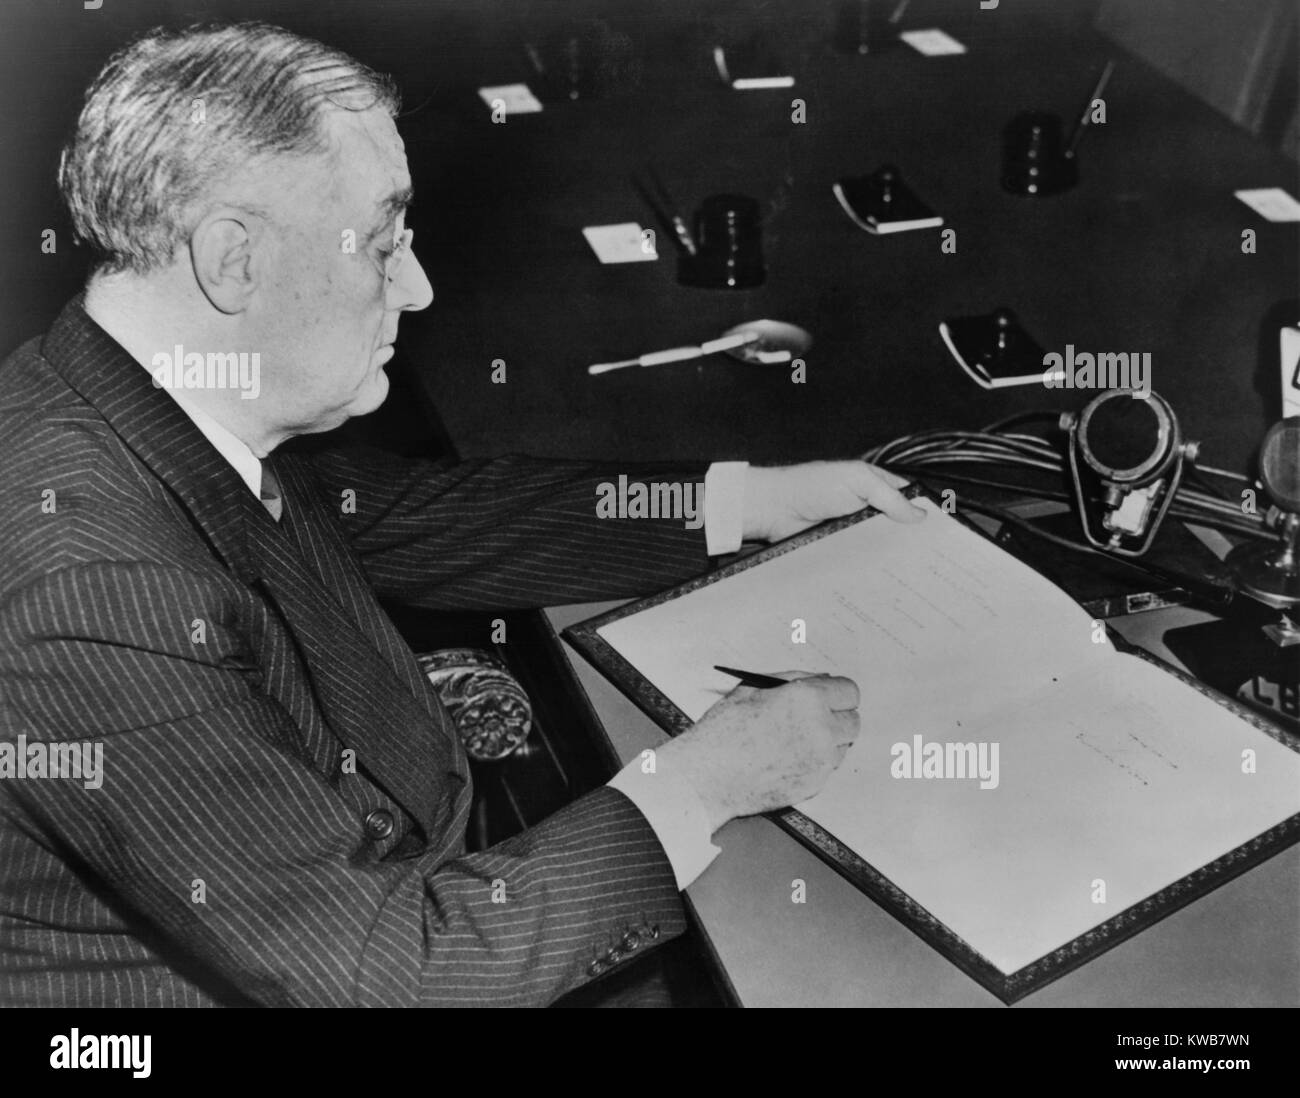 Franklin Roosevelt signing pact establishing the first UN relief agency on Nov. 9, 1943. The United Nations Relief and Rehabilitation Administration (UNRRA) provided humanitarian aid in the wake of World War 2. (BSLOC 2014 8 185) Stock Photo